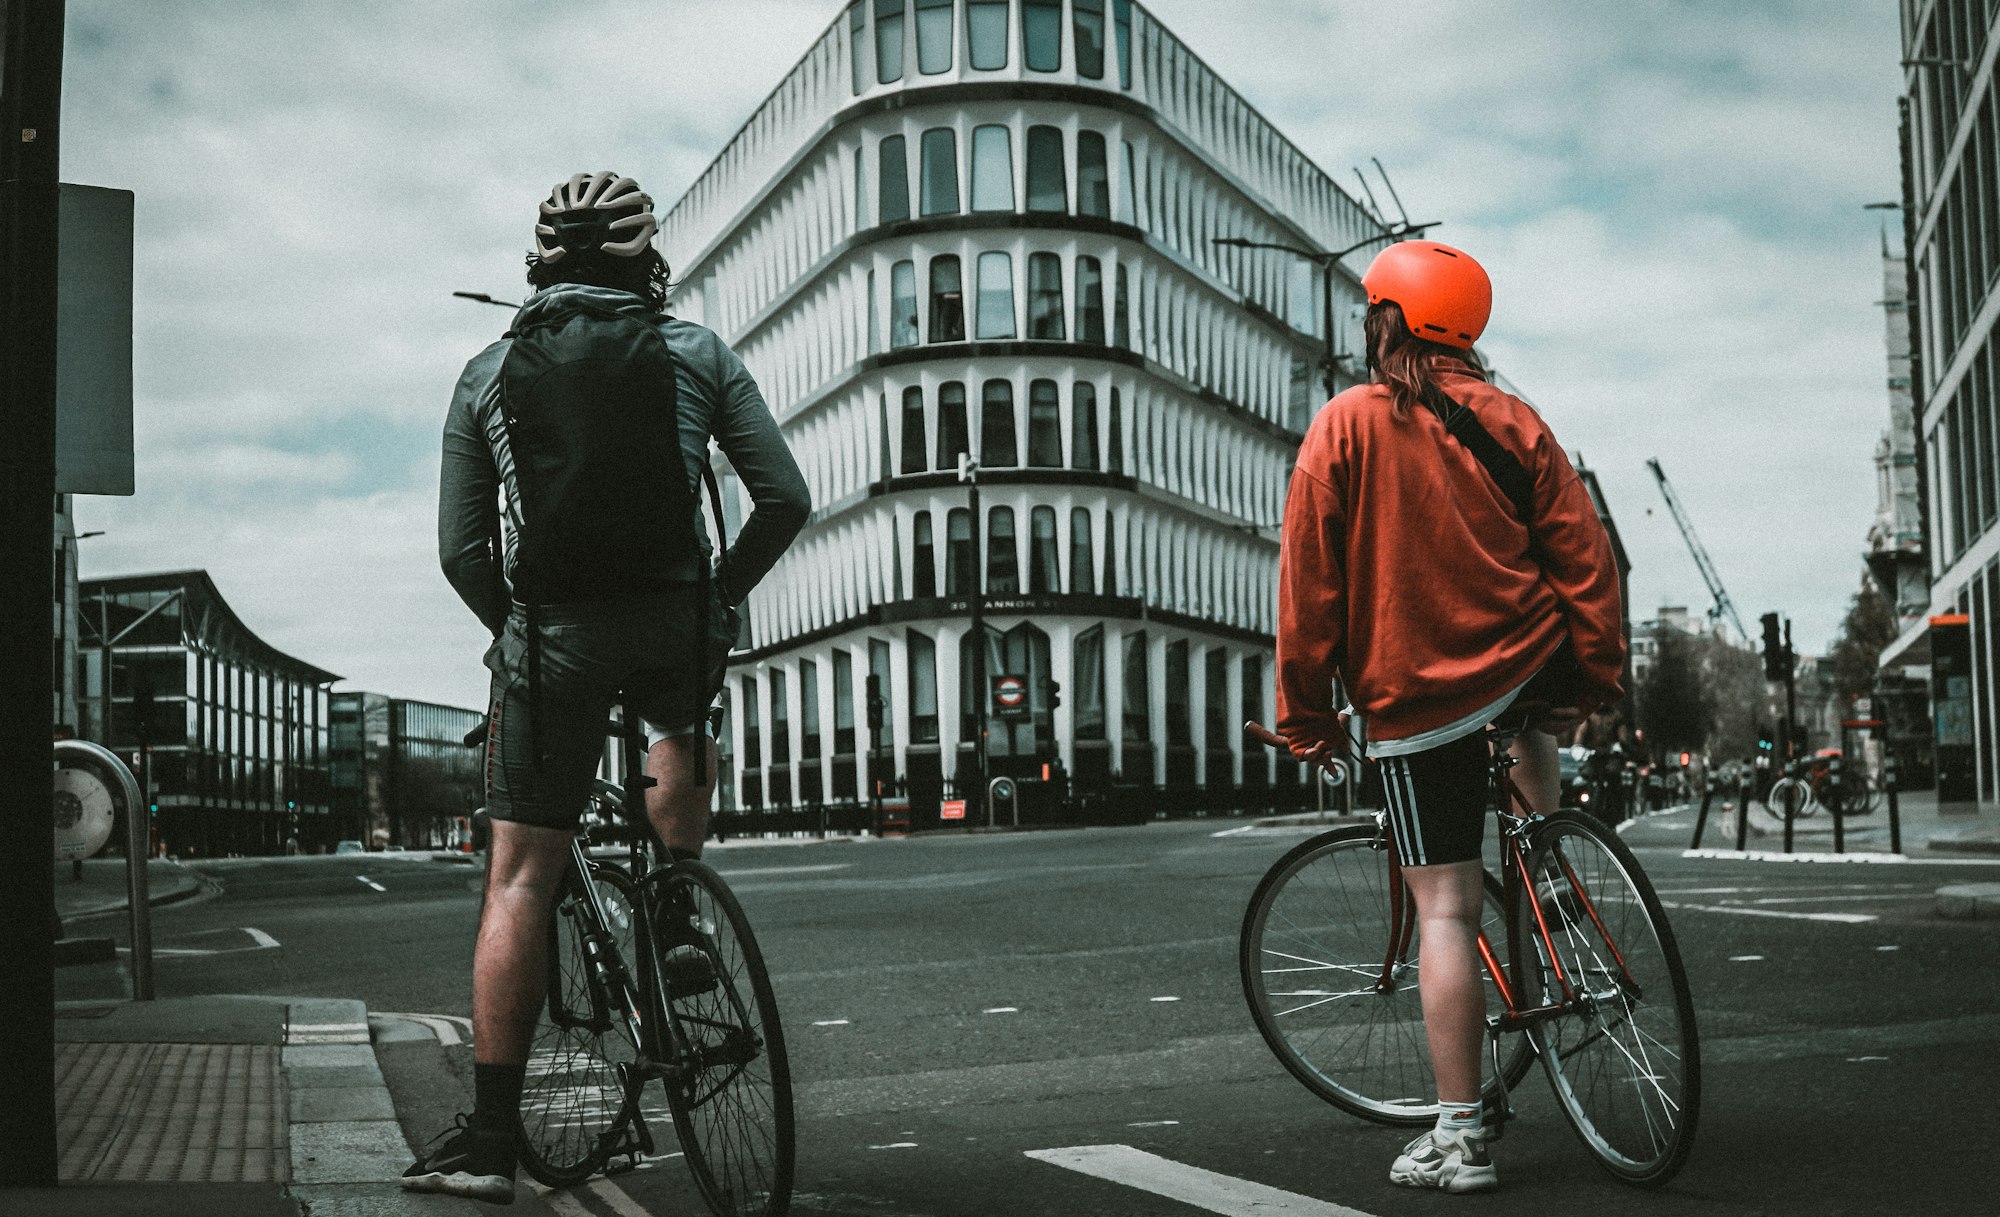 Two cyclists in London, UK